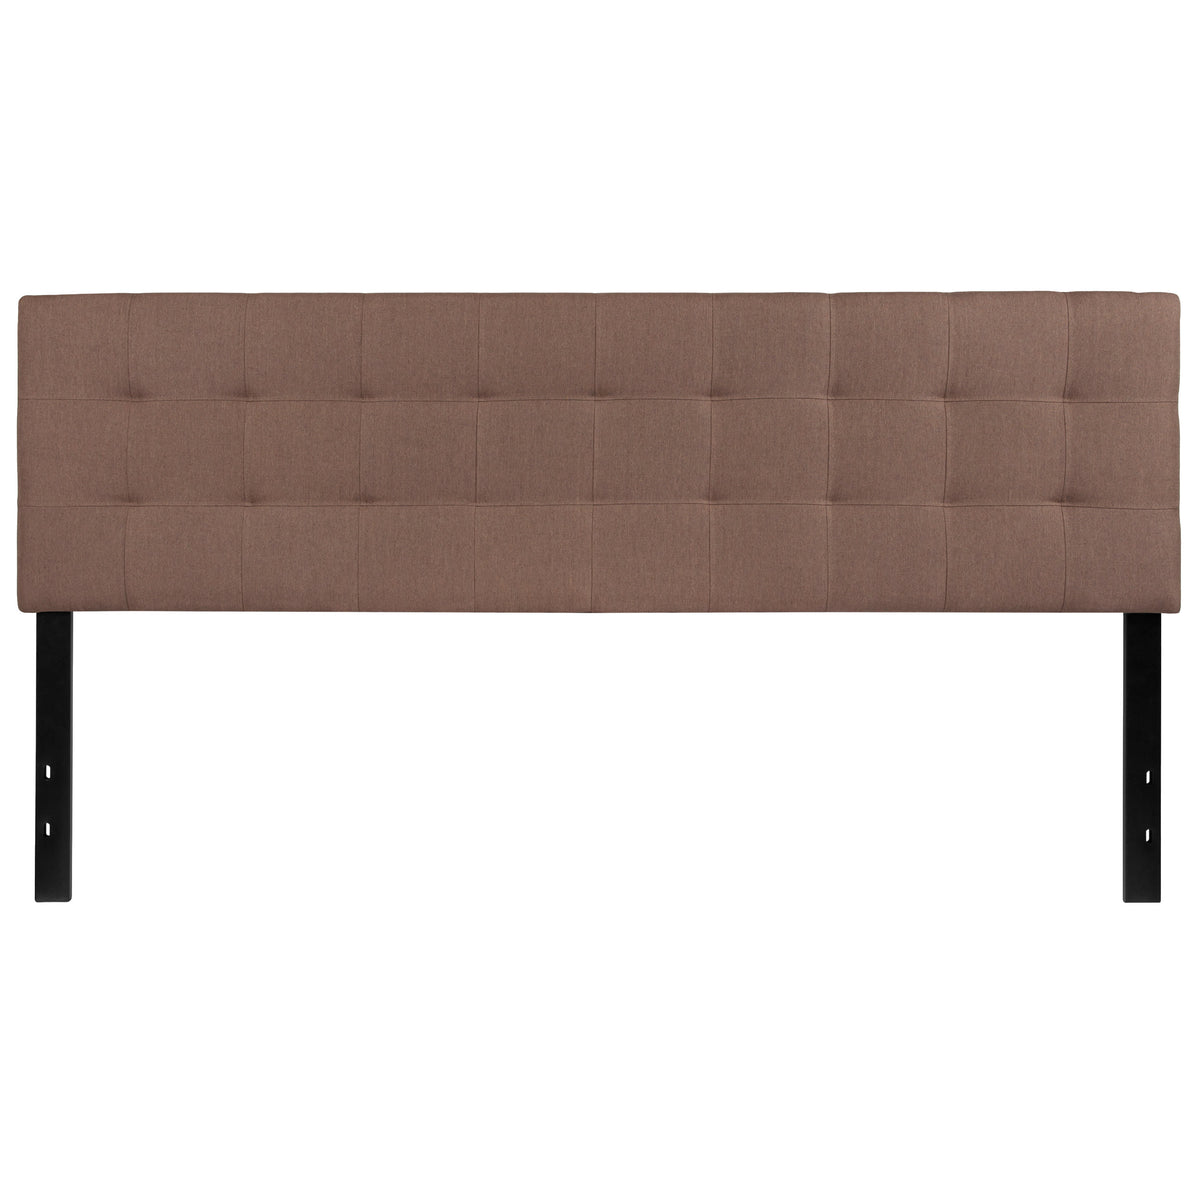 Camel,King |#| Quilted Tufted Upholstered King Size Headboard in Camel Fabric